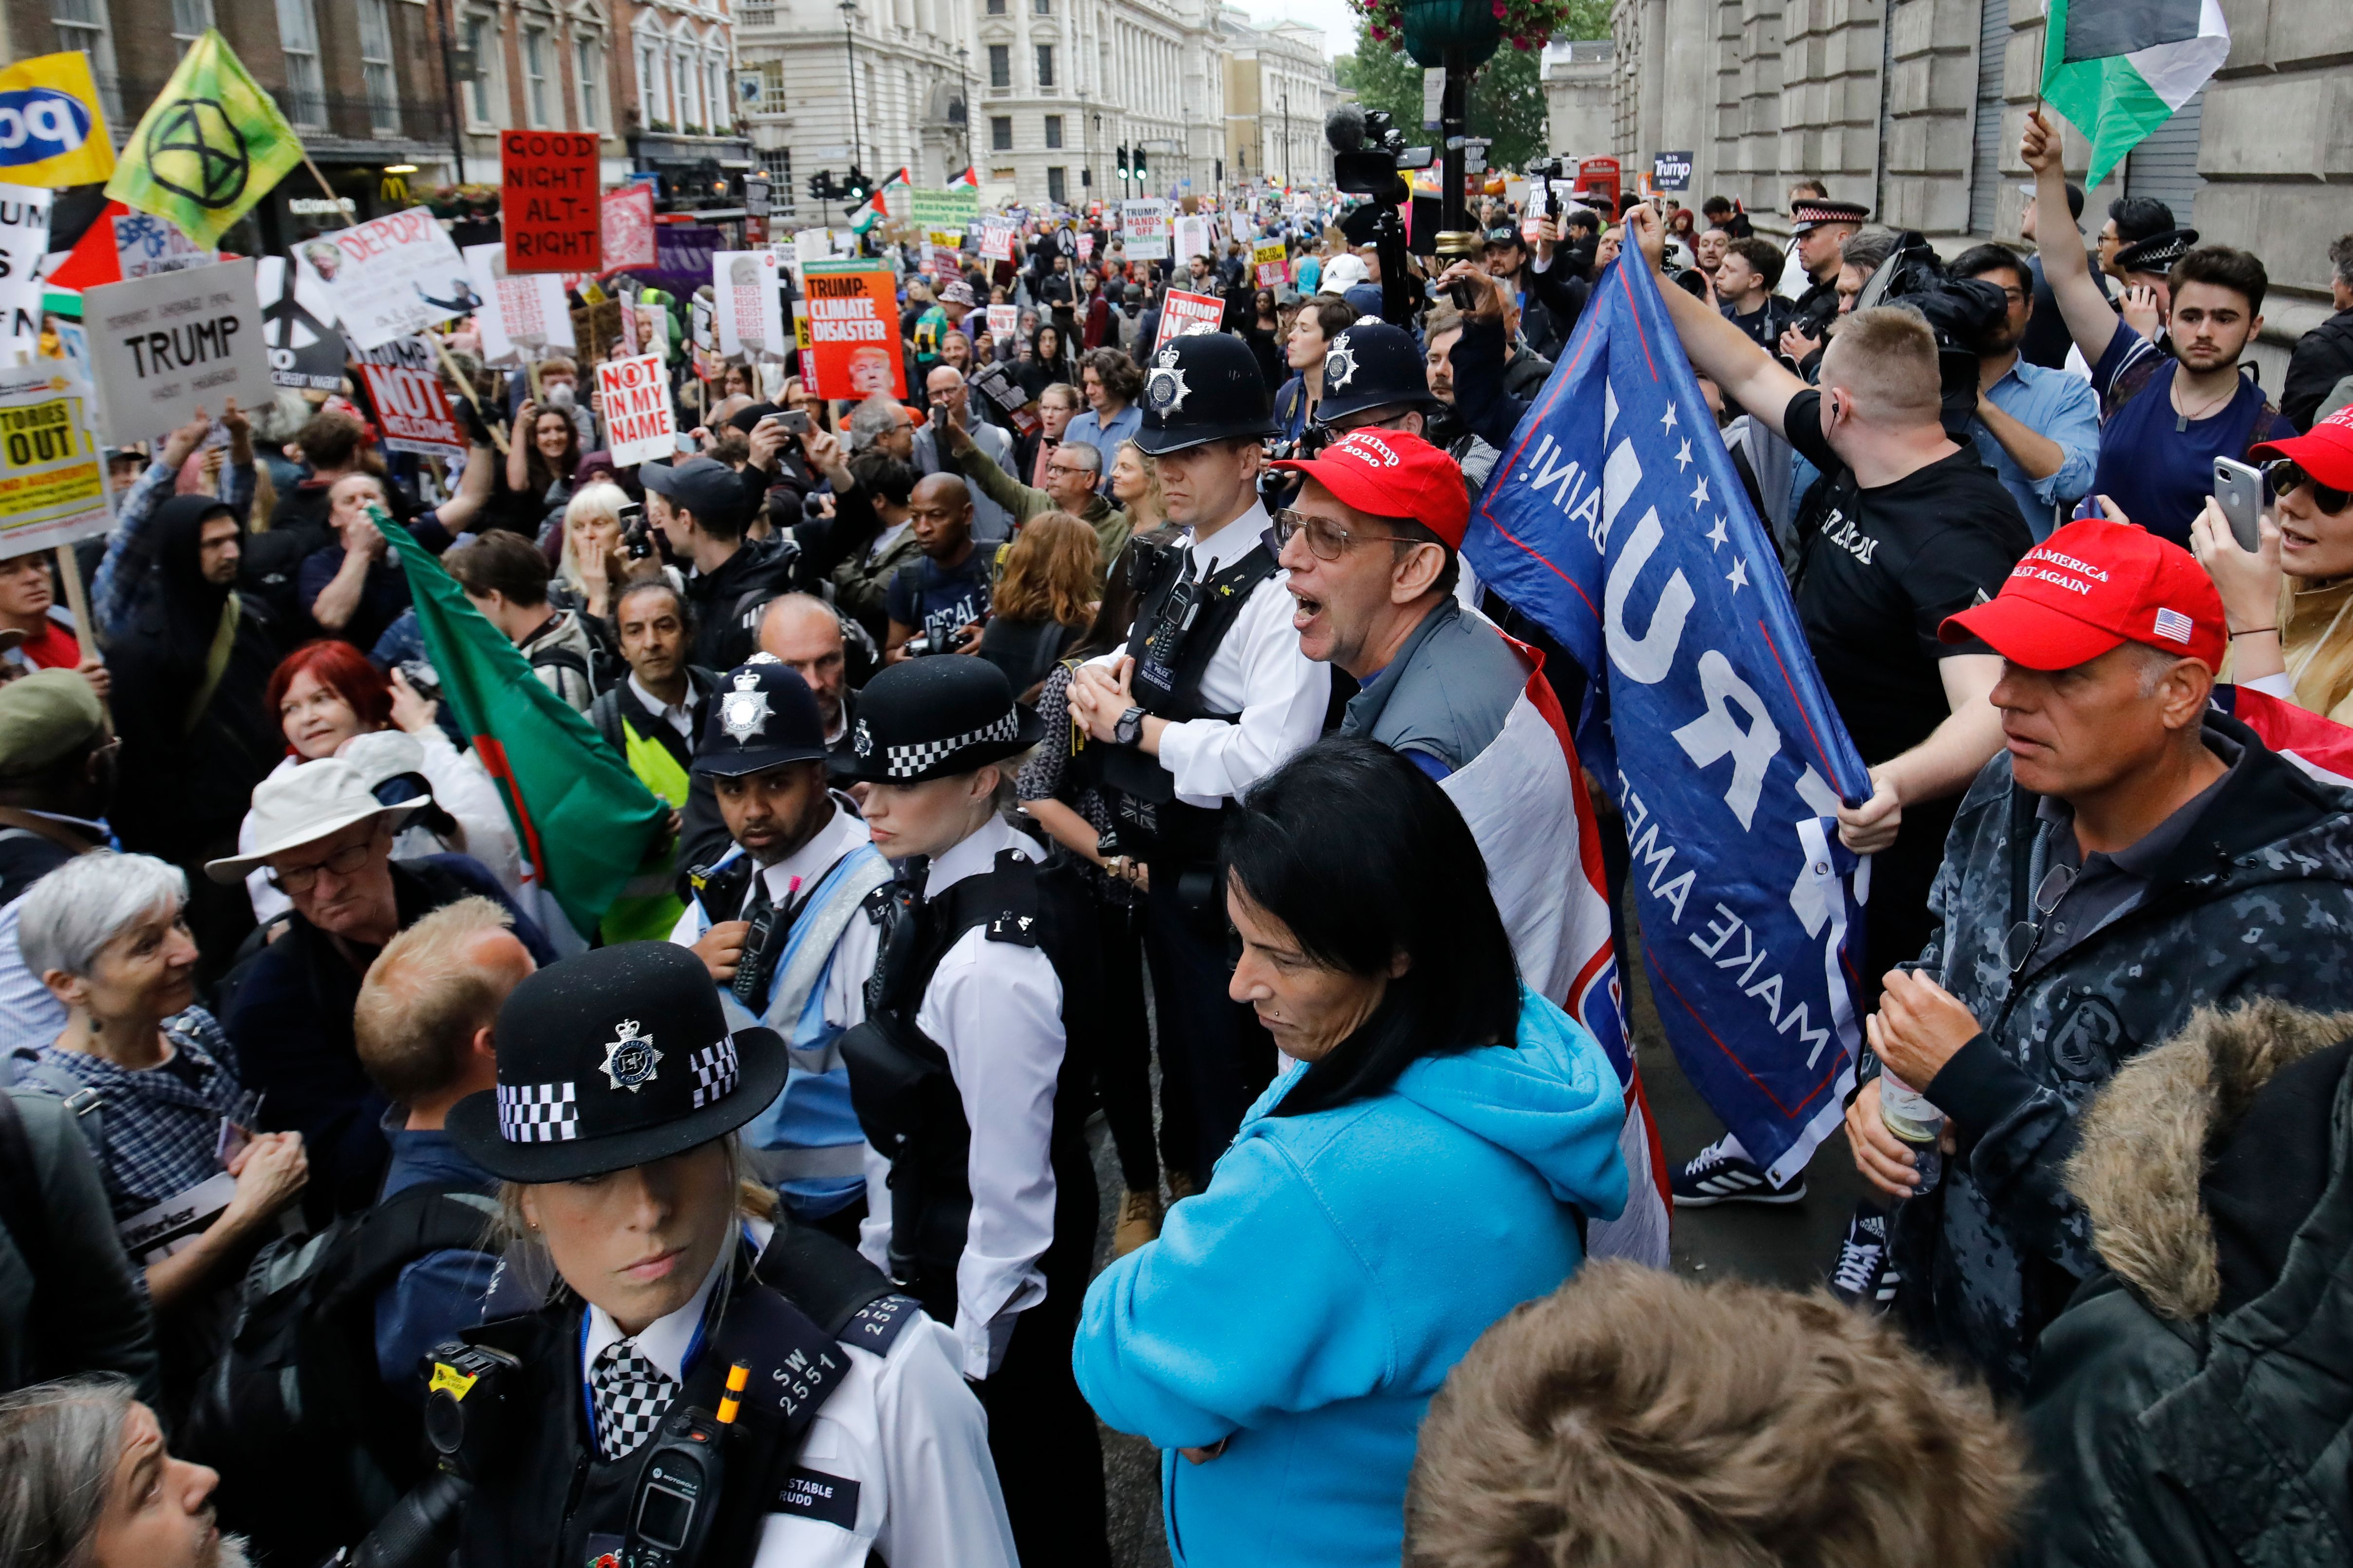 Police form a barrier between pro and anti-Trump protestors along whitehall in London on June 4, 2019.